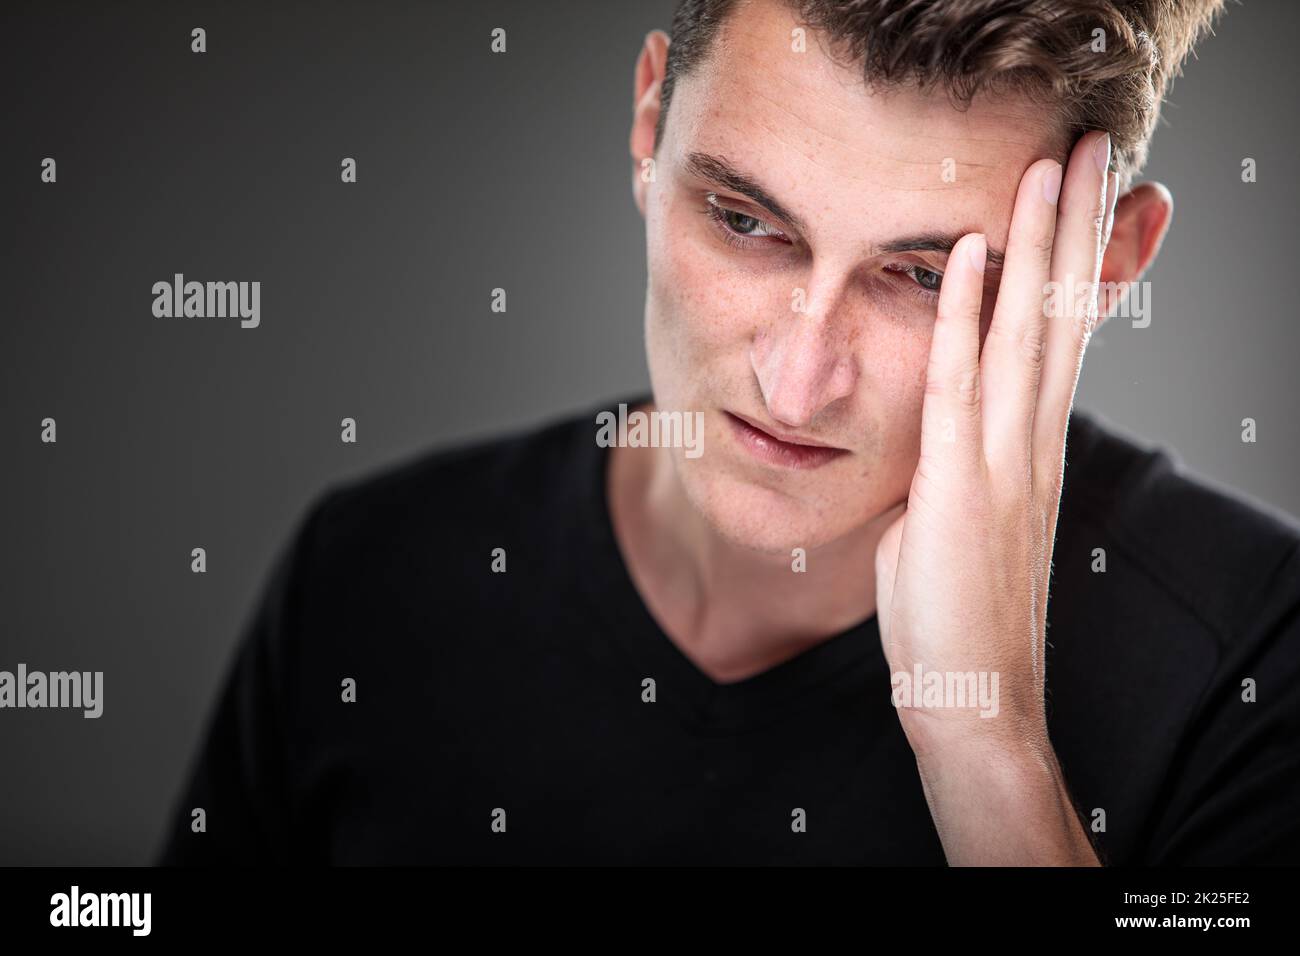 Fear/anxiety/regret/uncertainty in a young man - effects of a difficult life situation - vivid emotions concept Stock Photo